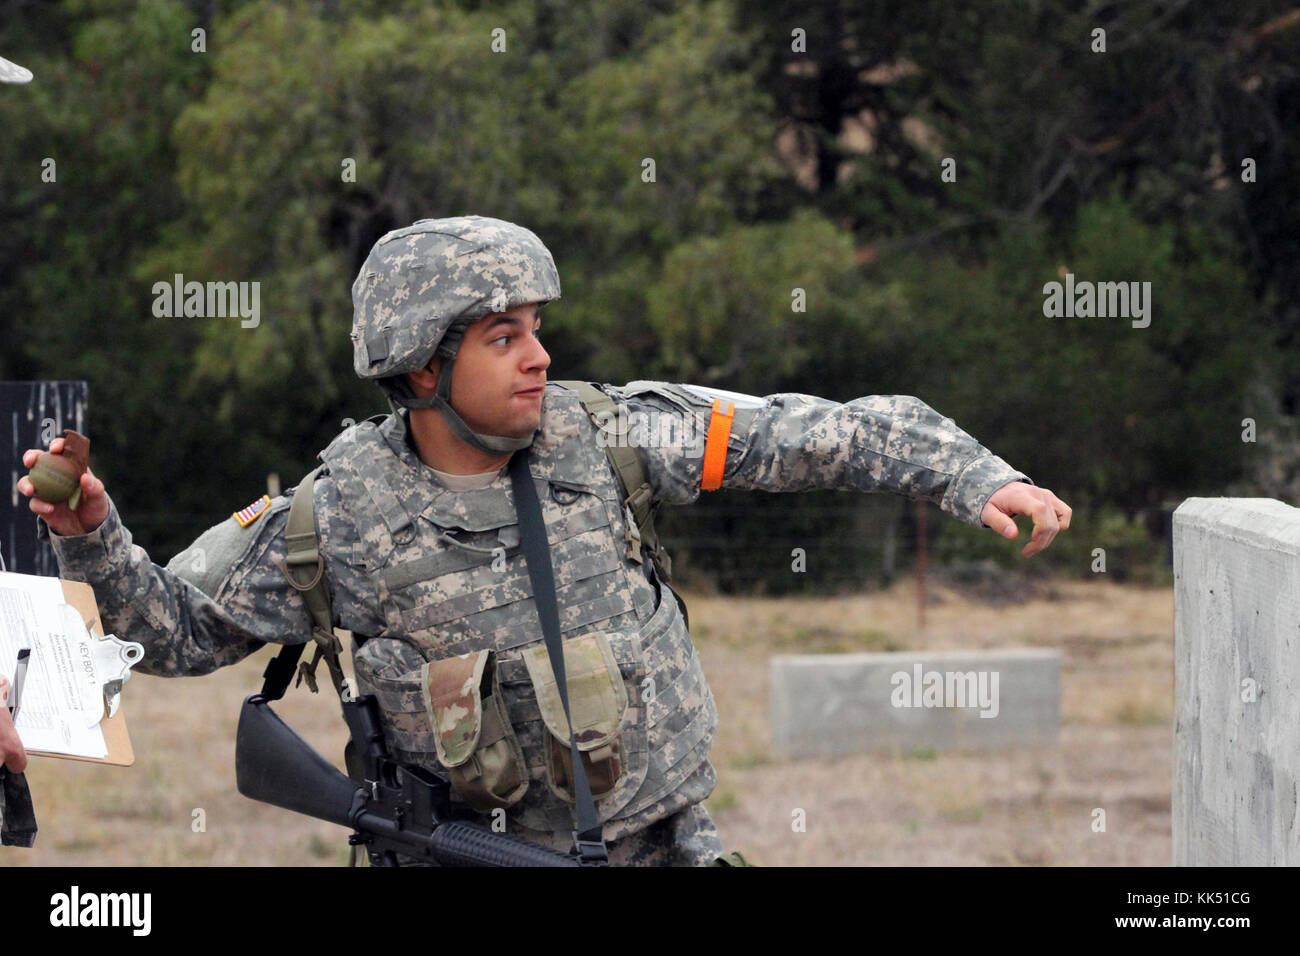 Spc. Fabio Avetisyan prepares to throw a grenade simulator Nov. 8 during the California Army National Guard's 2017-18 Best Warrior Competition at Camp San Luis Obispo, California. This was one of the last tests after four competitive days to find California’s Best of the Best. (Army National Guard photo by Staff Sgt. Eddie Siguenza) Stock Photo